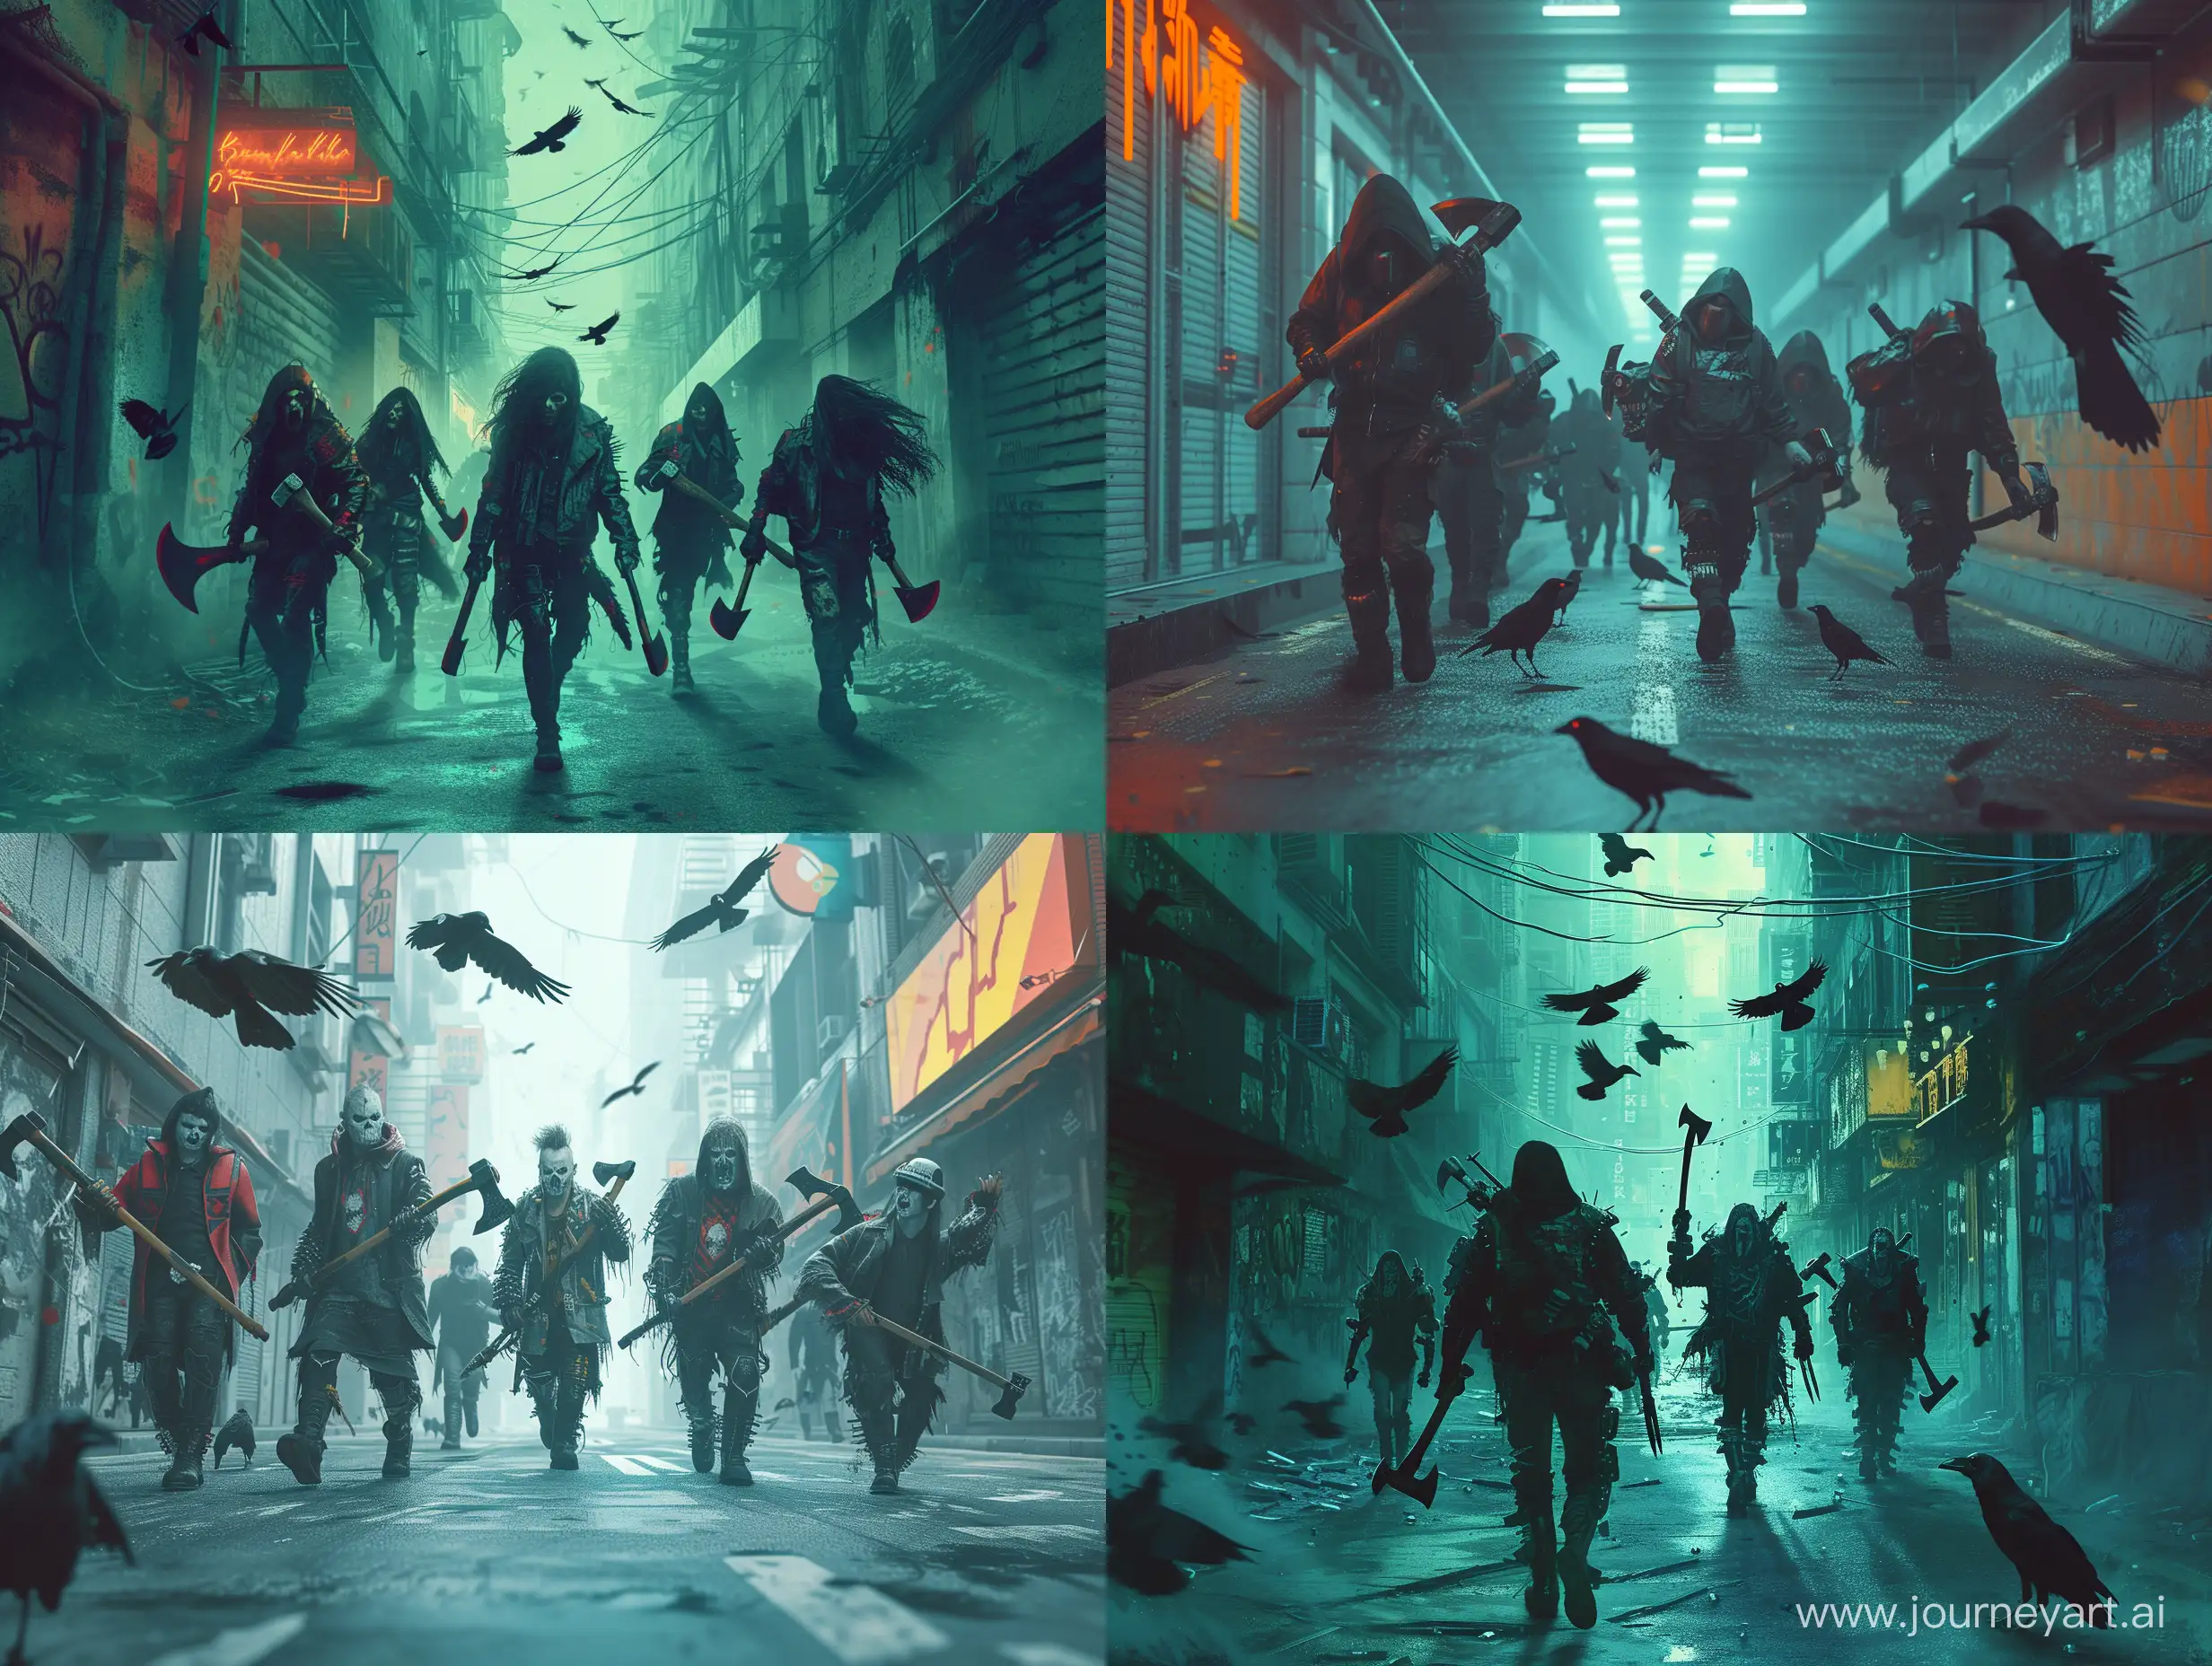 a futuristic gang of scary punk rockers walk towards us down a futuristic dystopian city alleyway, they carry axes, several crows are flying on the road, photo-realistic, atmospheric lighting